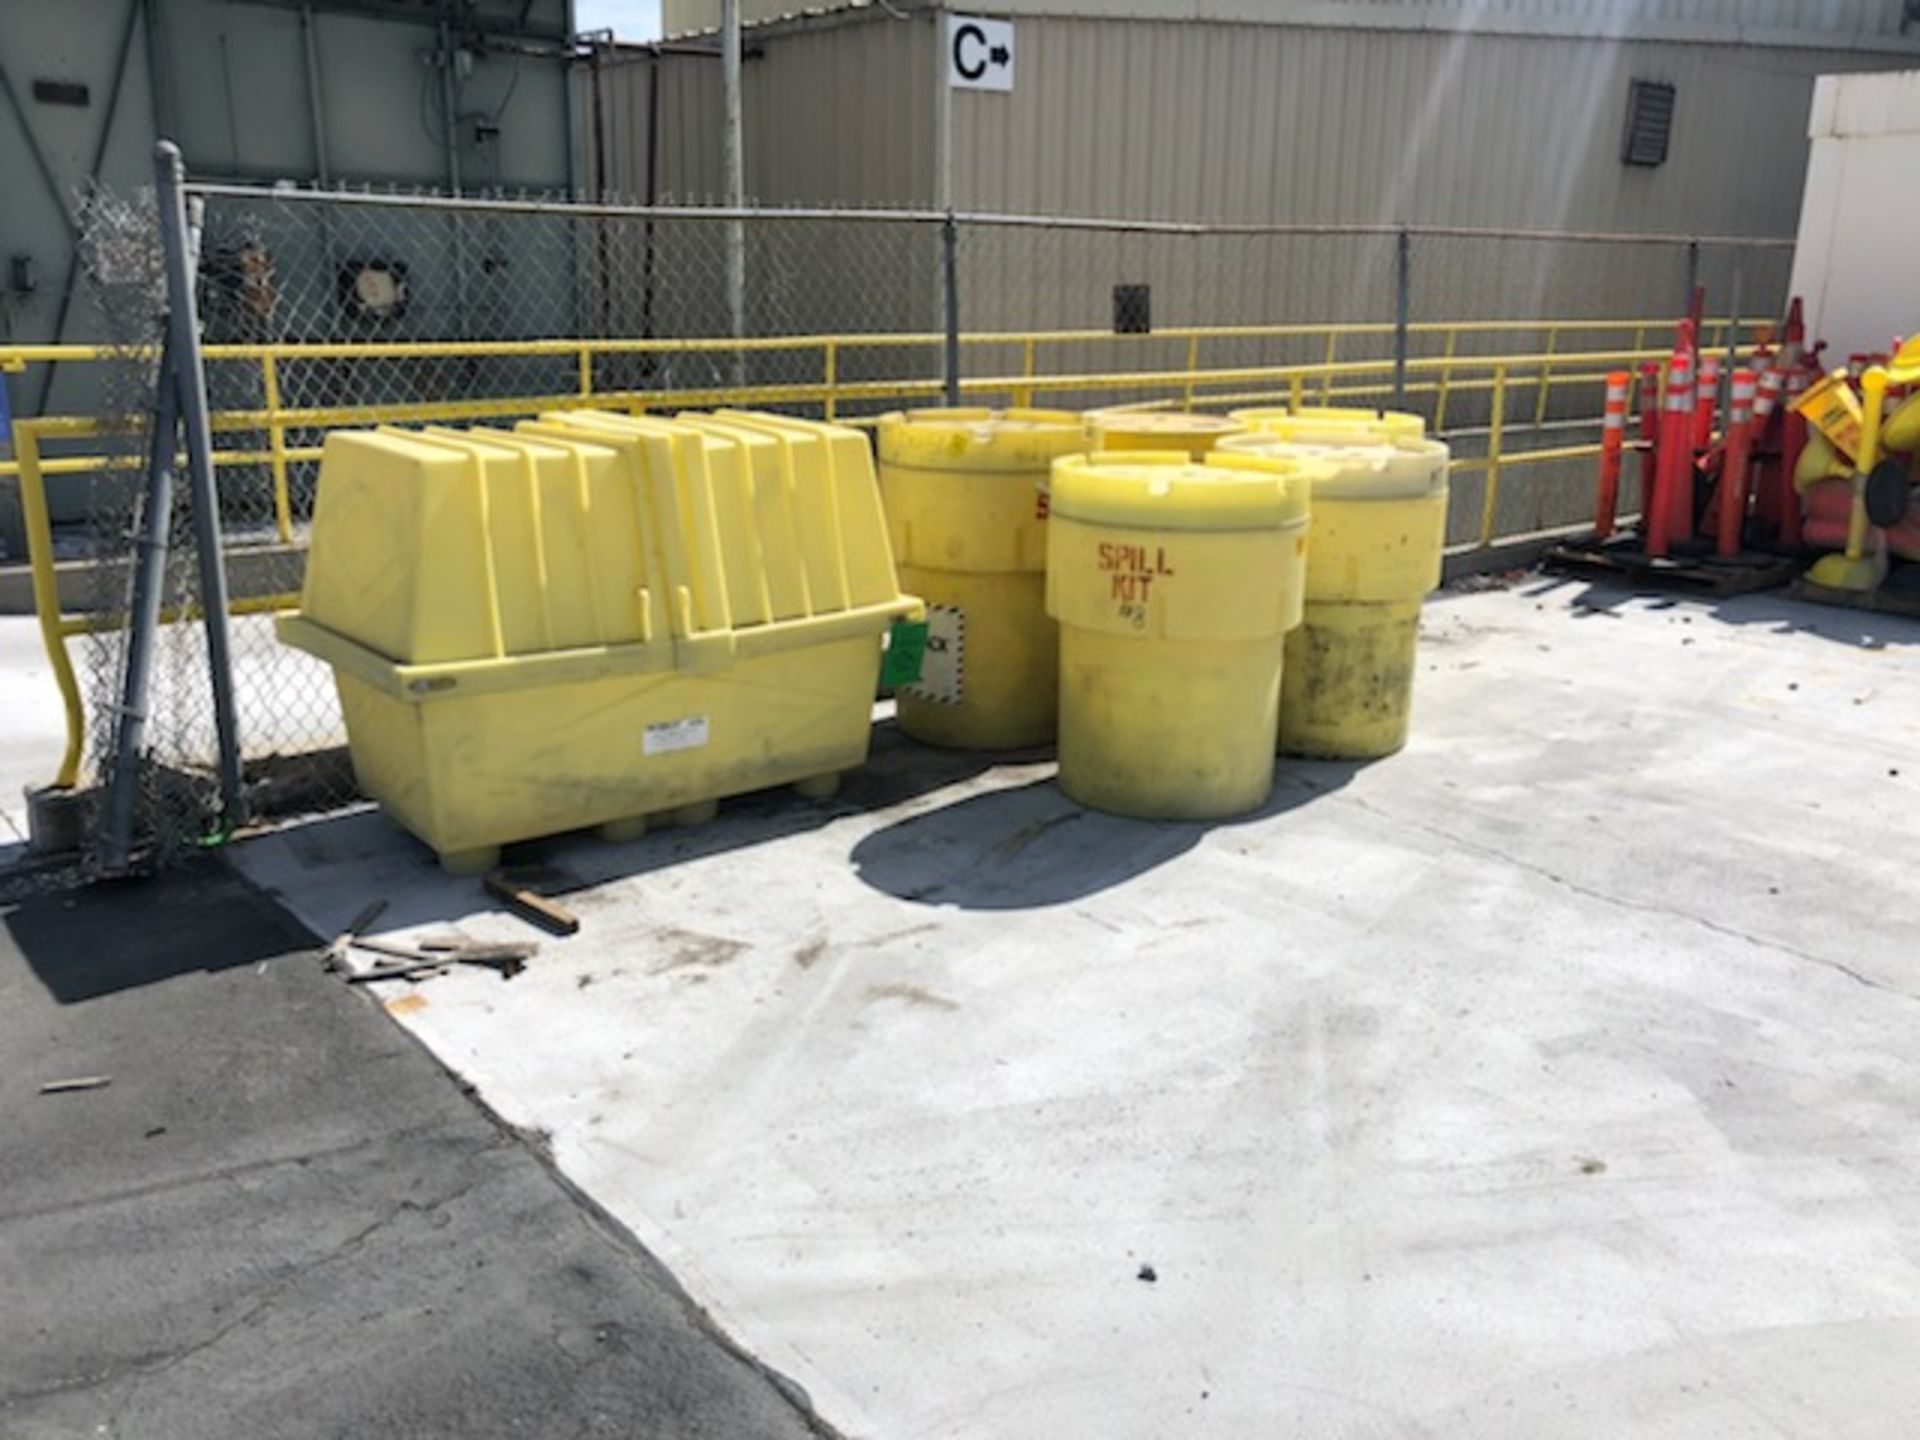 SPILL CONTAINMENT KITS